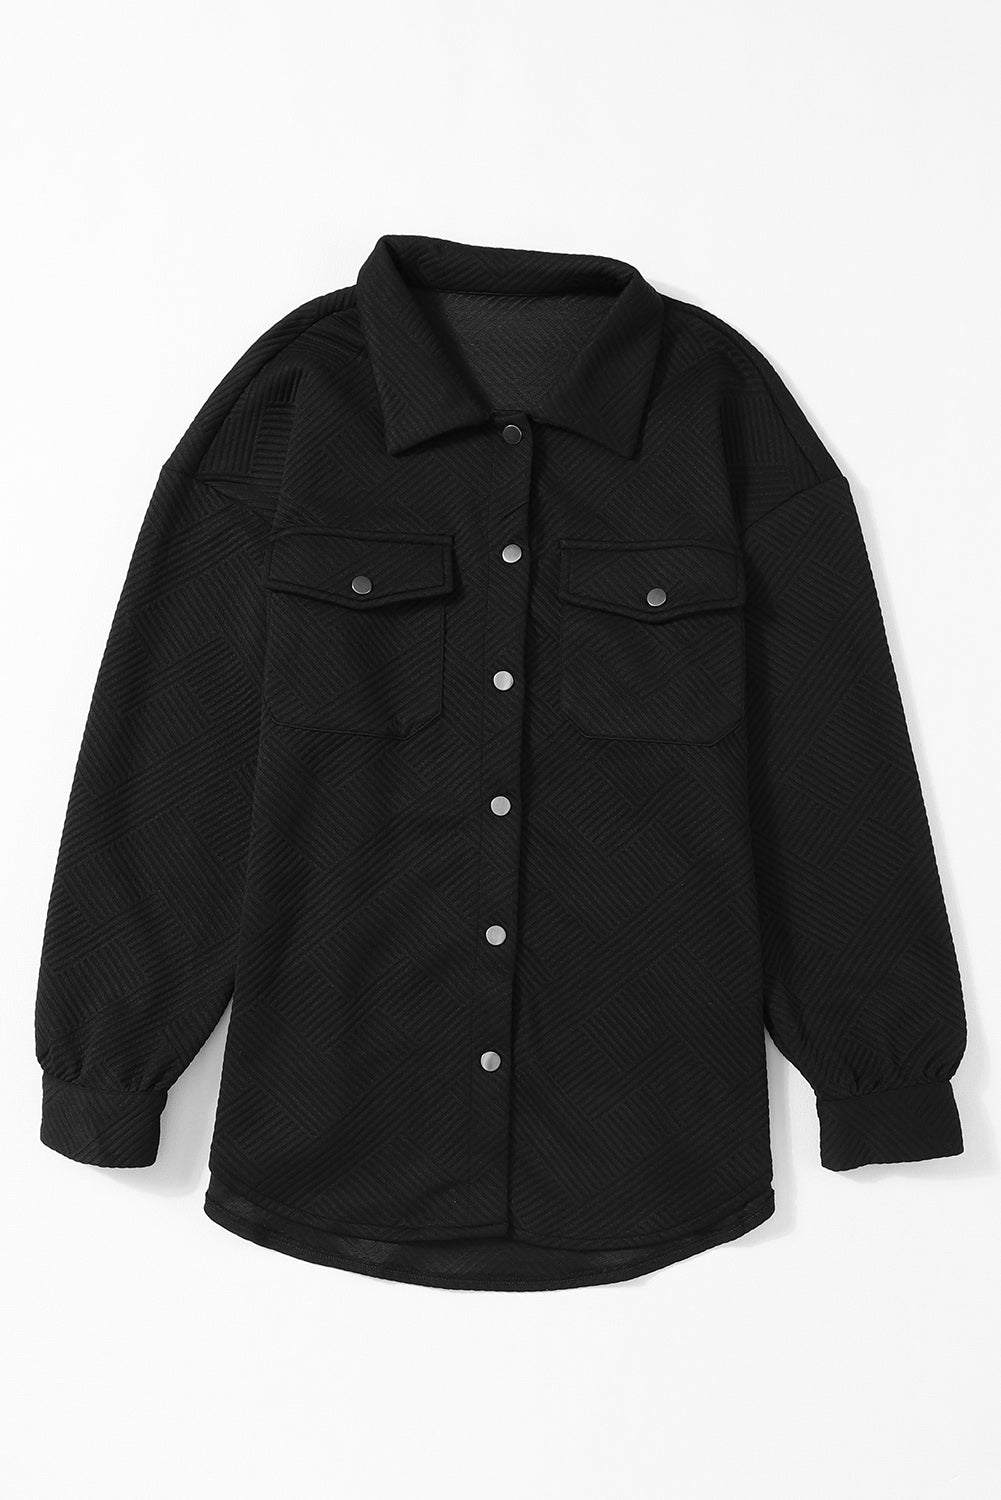 Black Solid Textured Flap Pocket Buttoned Shacket-5